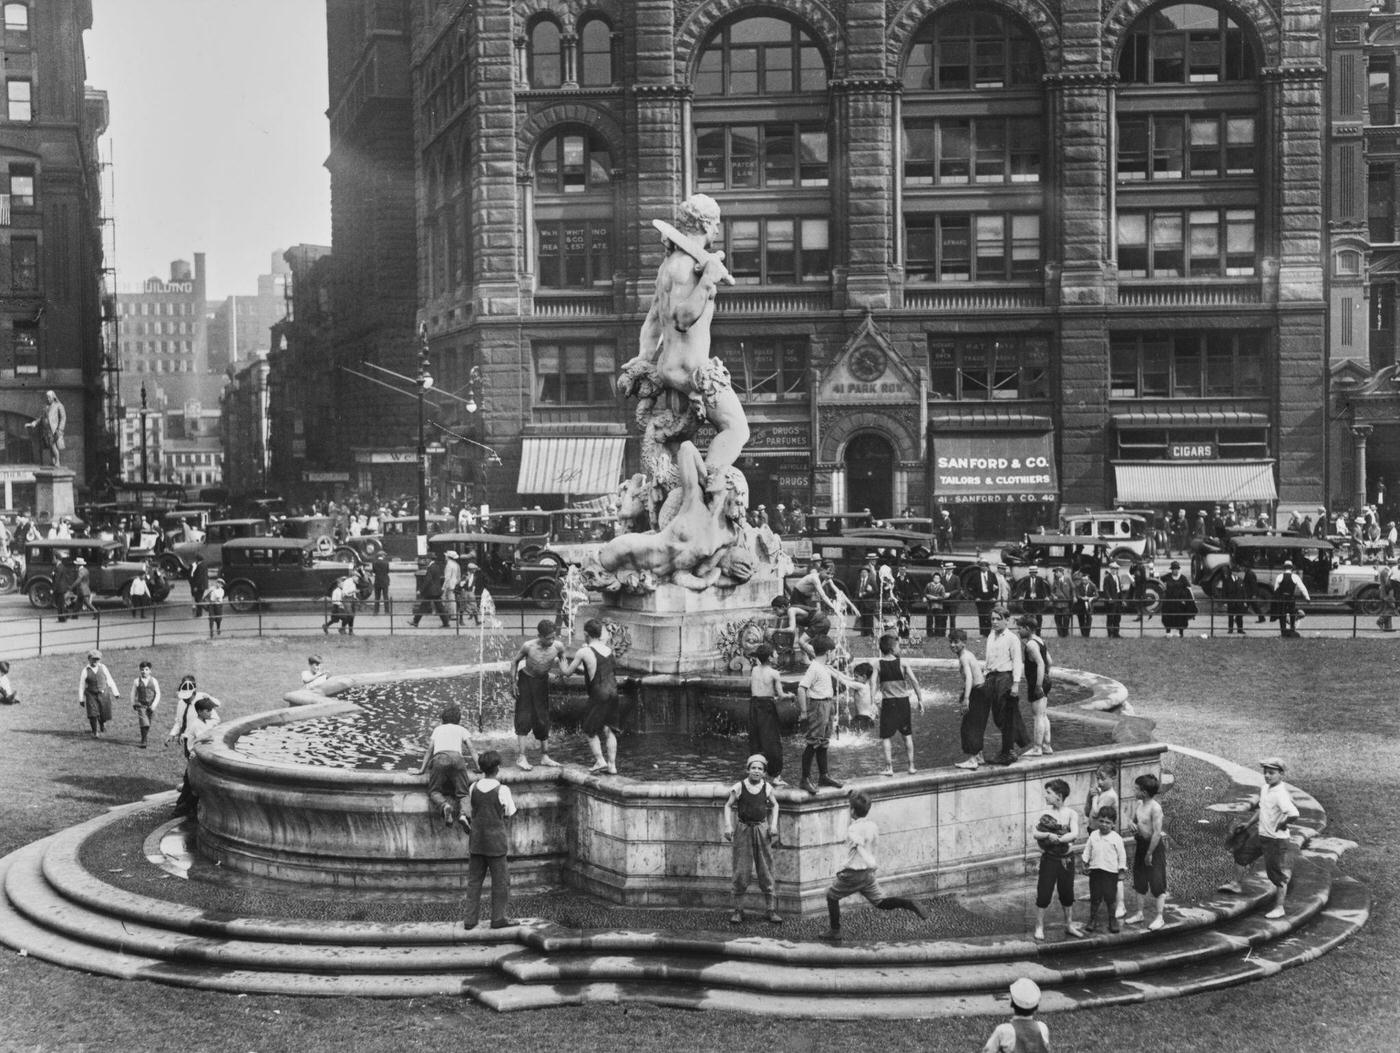 Children Playing At 'Civic Virtue Triumphant Over Unrighteousness', Angelina Crane Fountain Outside City Hall, Manhattan, Circa 1925.